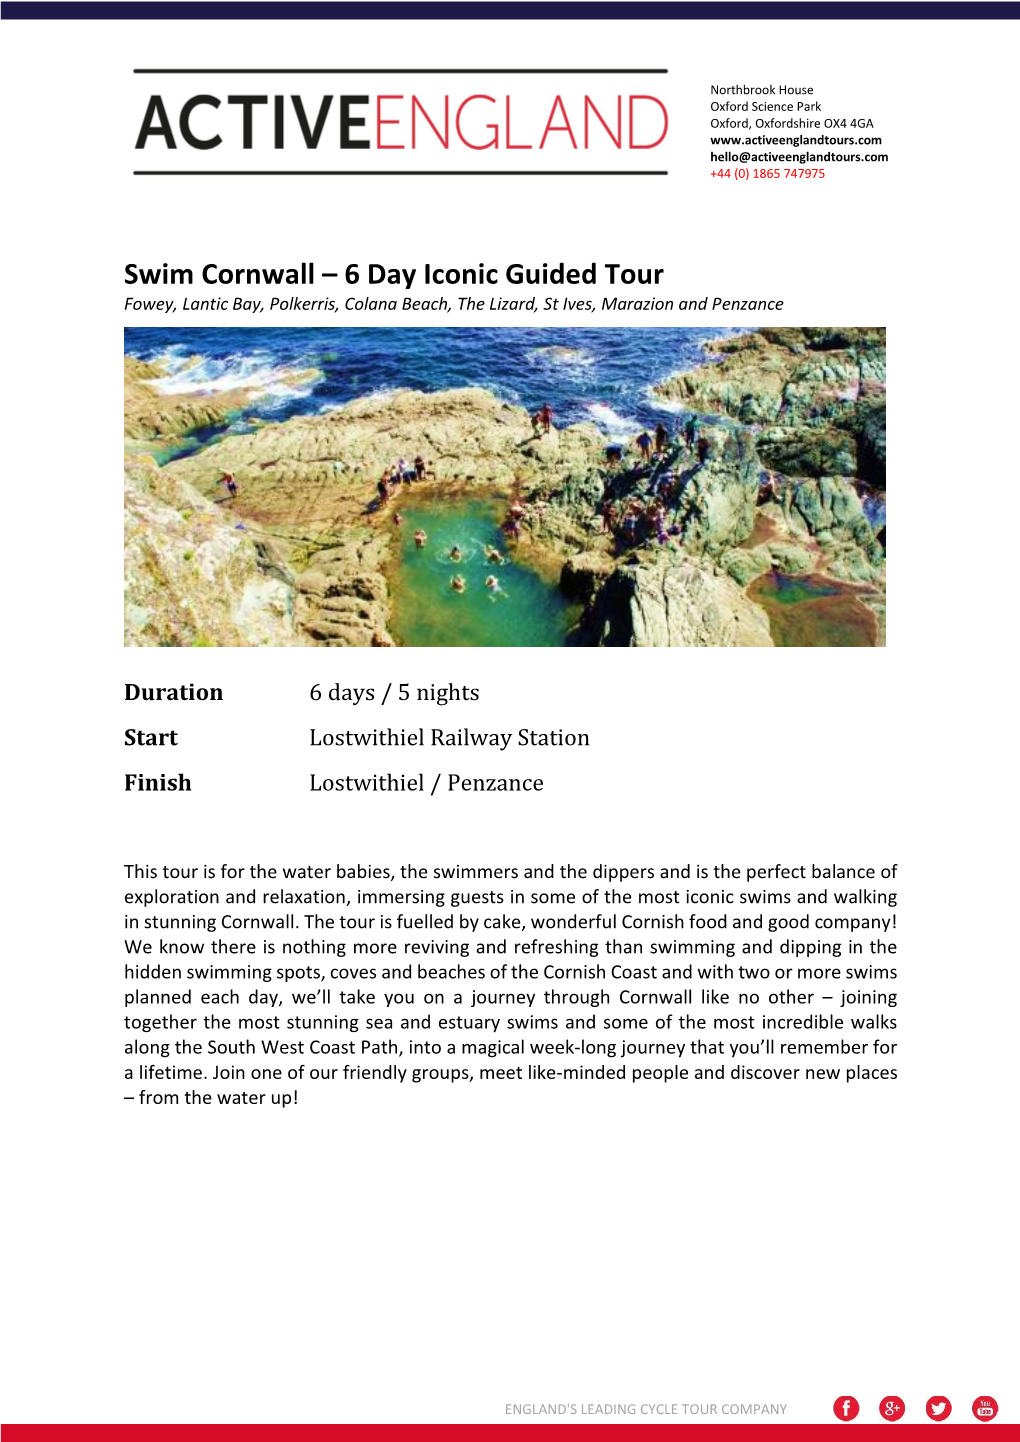 Swim Cornwall – 6 Day Iconic Guided Tour Fowey, Lantic Bay, Polkerris, Colana Beach, the Lizard, St Ives, Marazion and Penzance